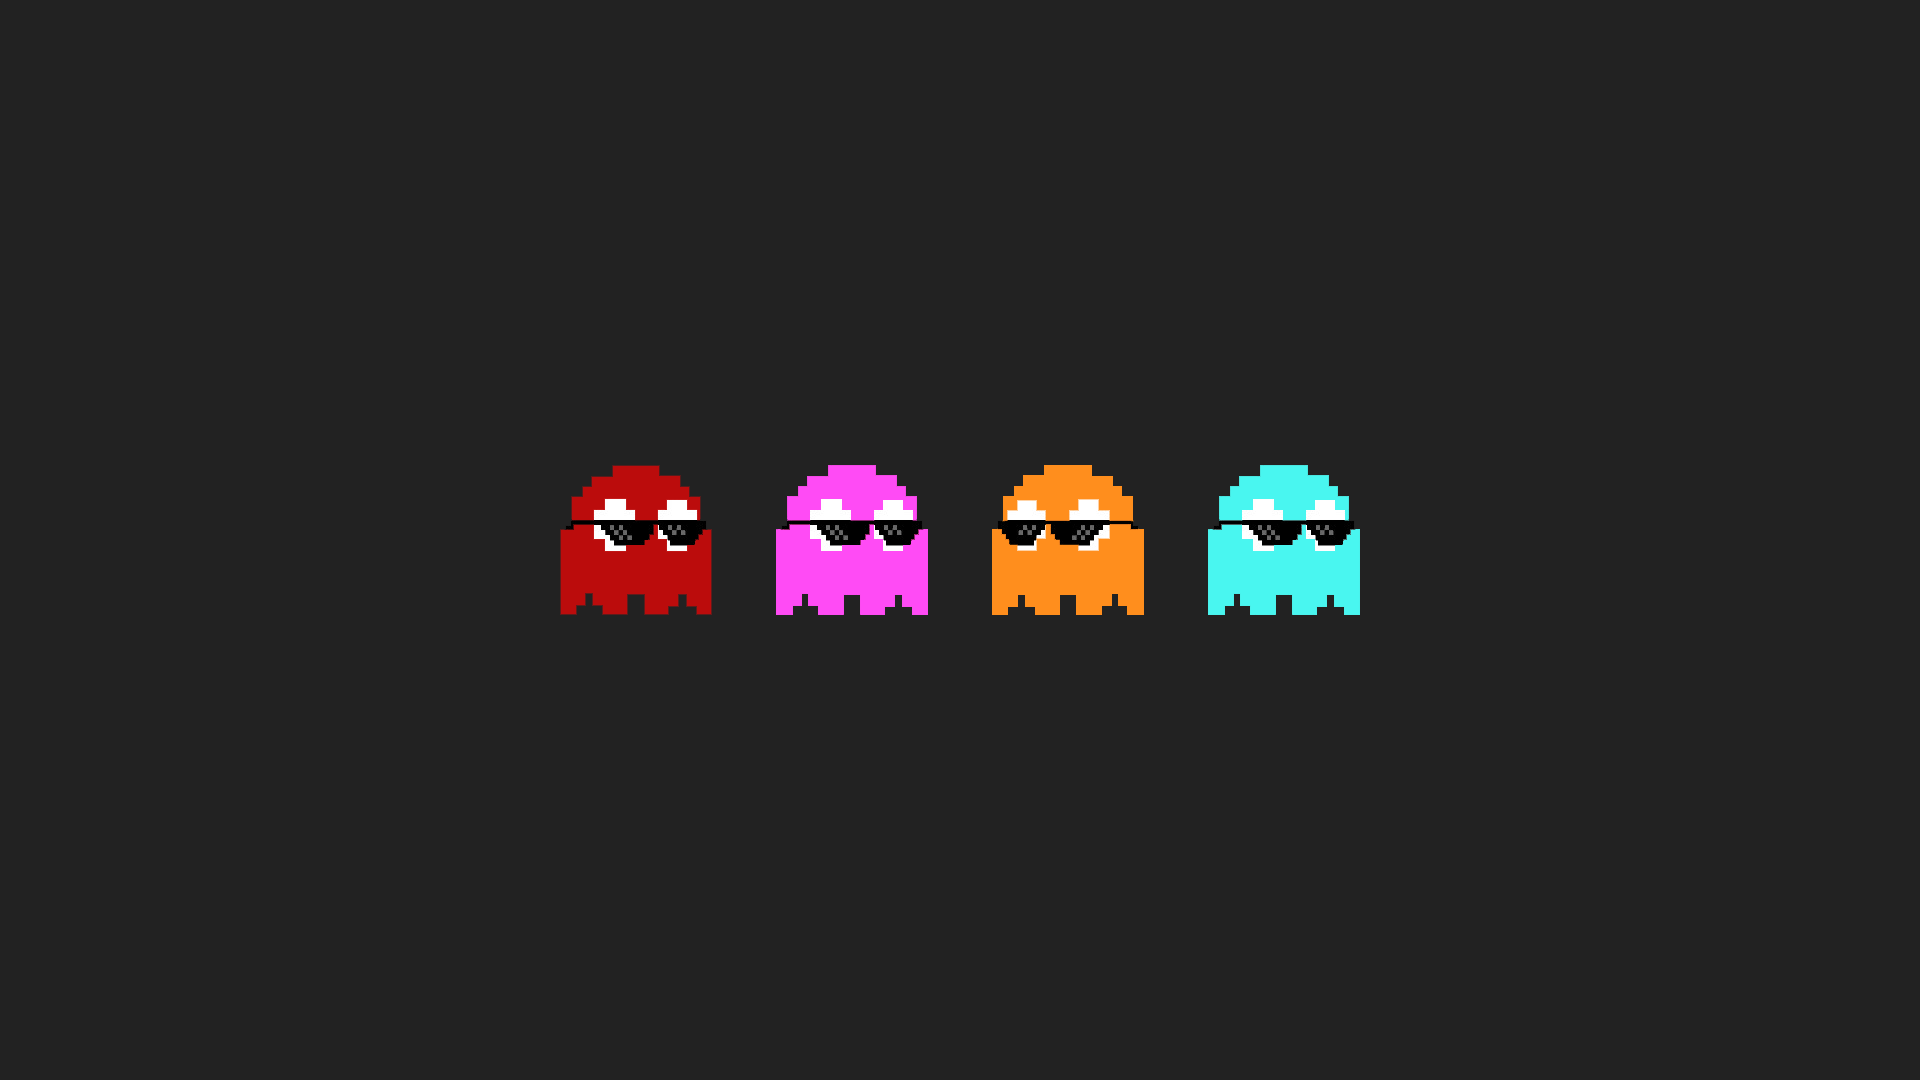 Pacman Ghosts [1920x1080]